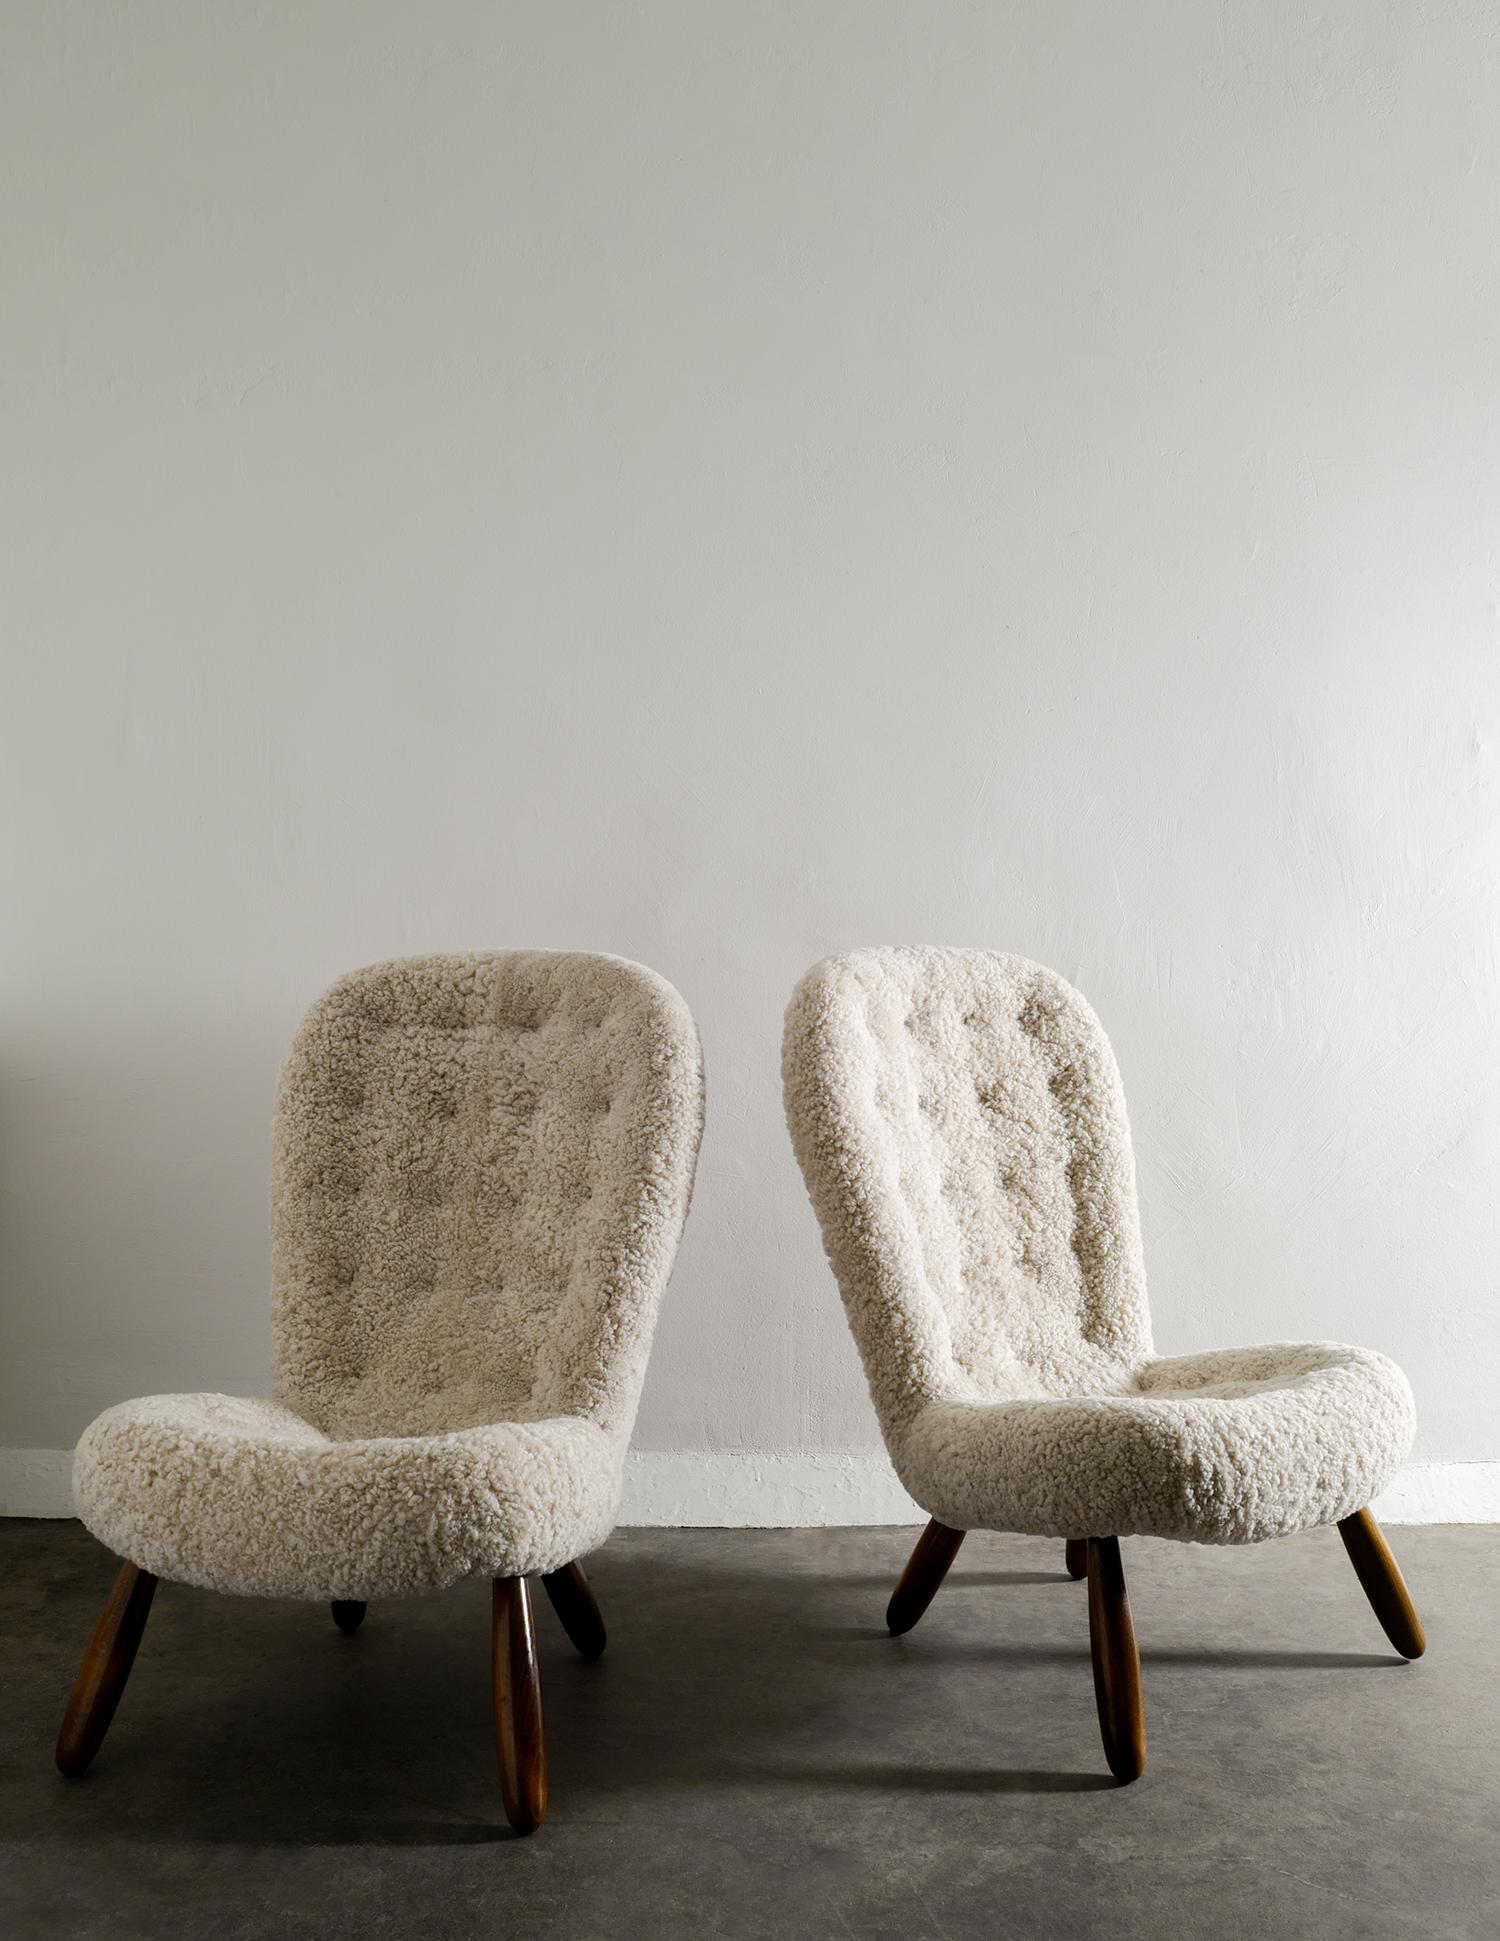 Very rare pair of midcentury / Scandinavian modern high back clam chairs designed by Arnold Madsen produced in Denmark in the late 1940s by Nordisk Stål & Møbel Central. Great matching pair and both chairs have been professionally restored and